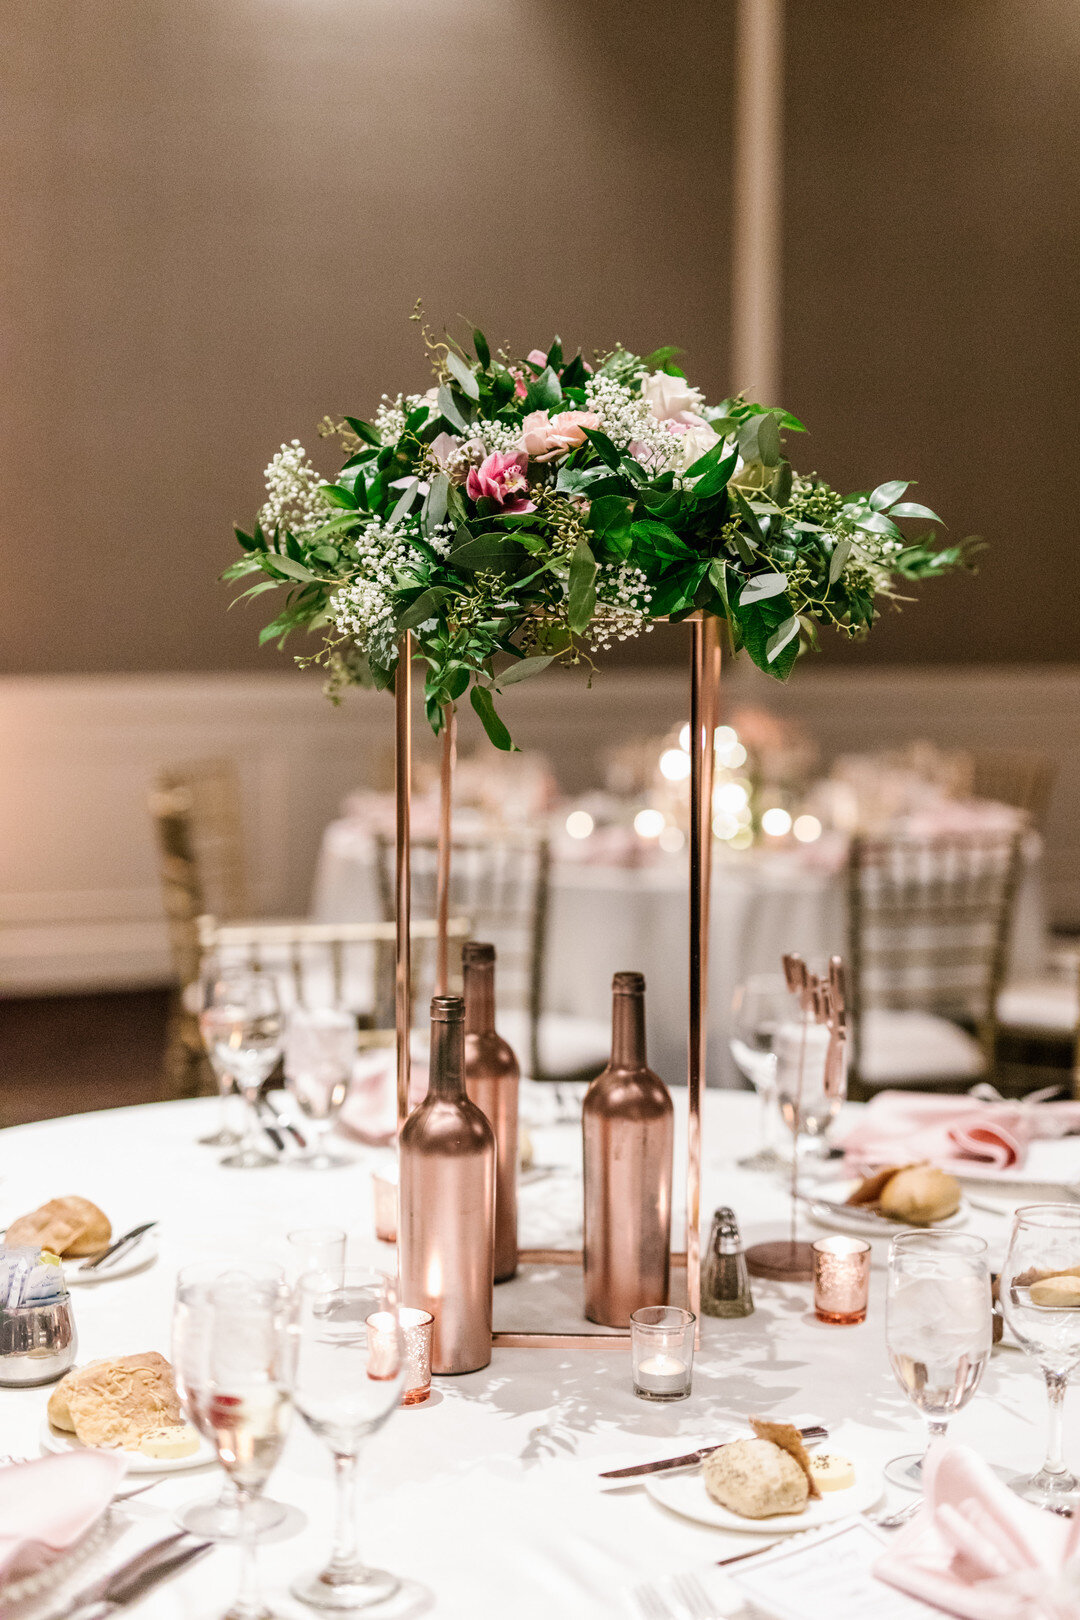 Chicago spring wedding captured by Hannah Rose Gray Photography. See more timeless wedding ideas on CHItheeWED.com!